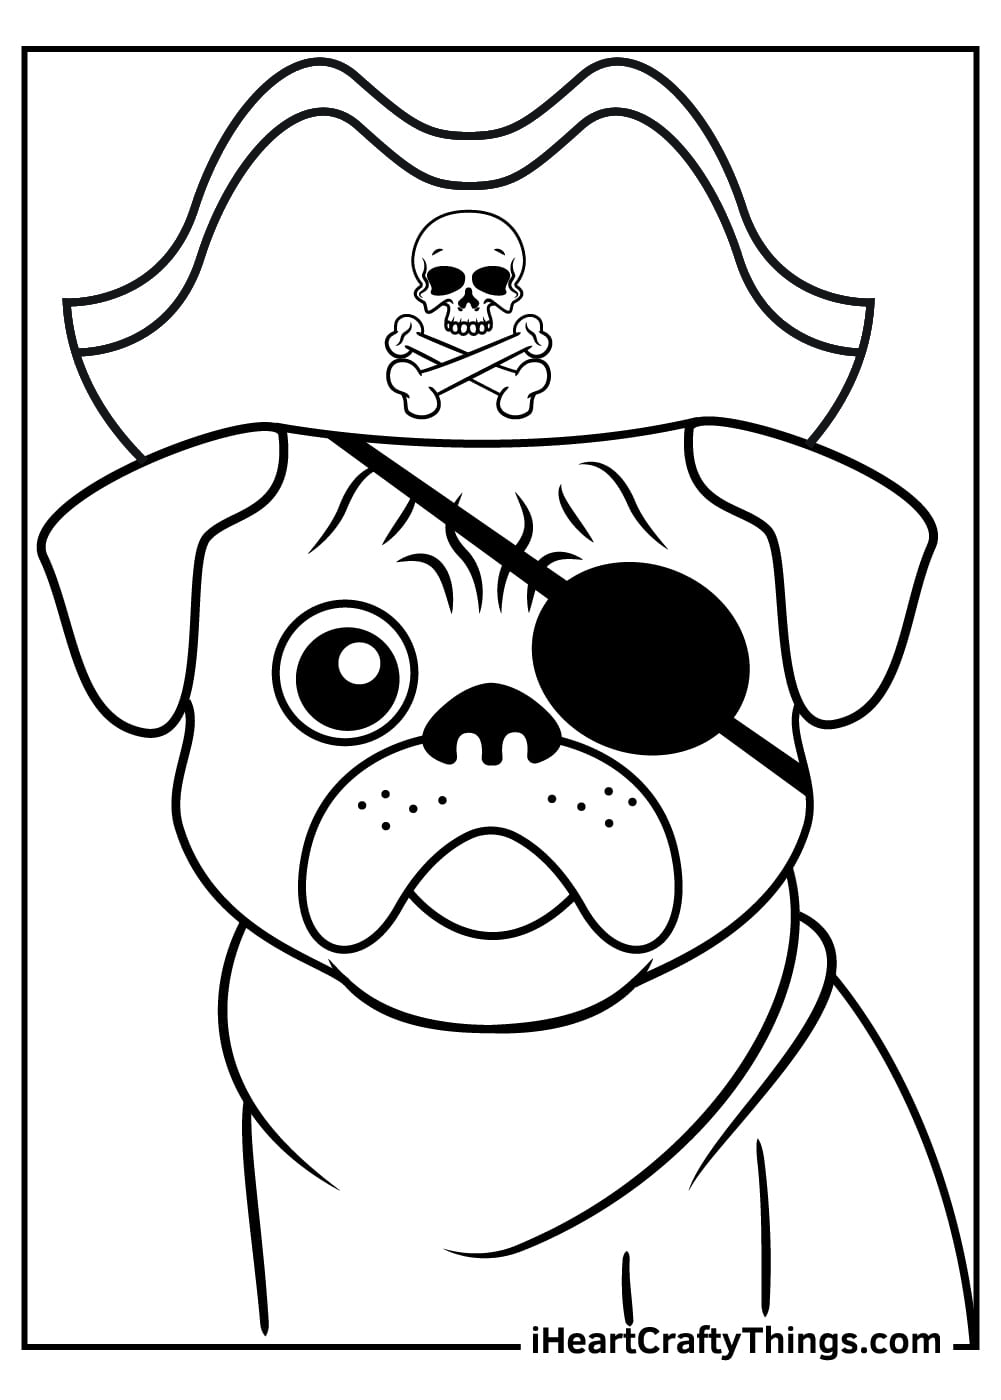 Puppy Cute Coloring Page